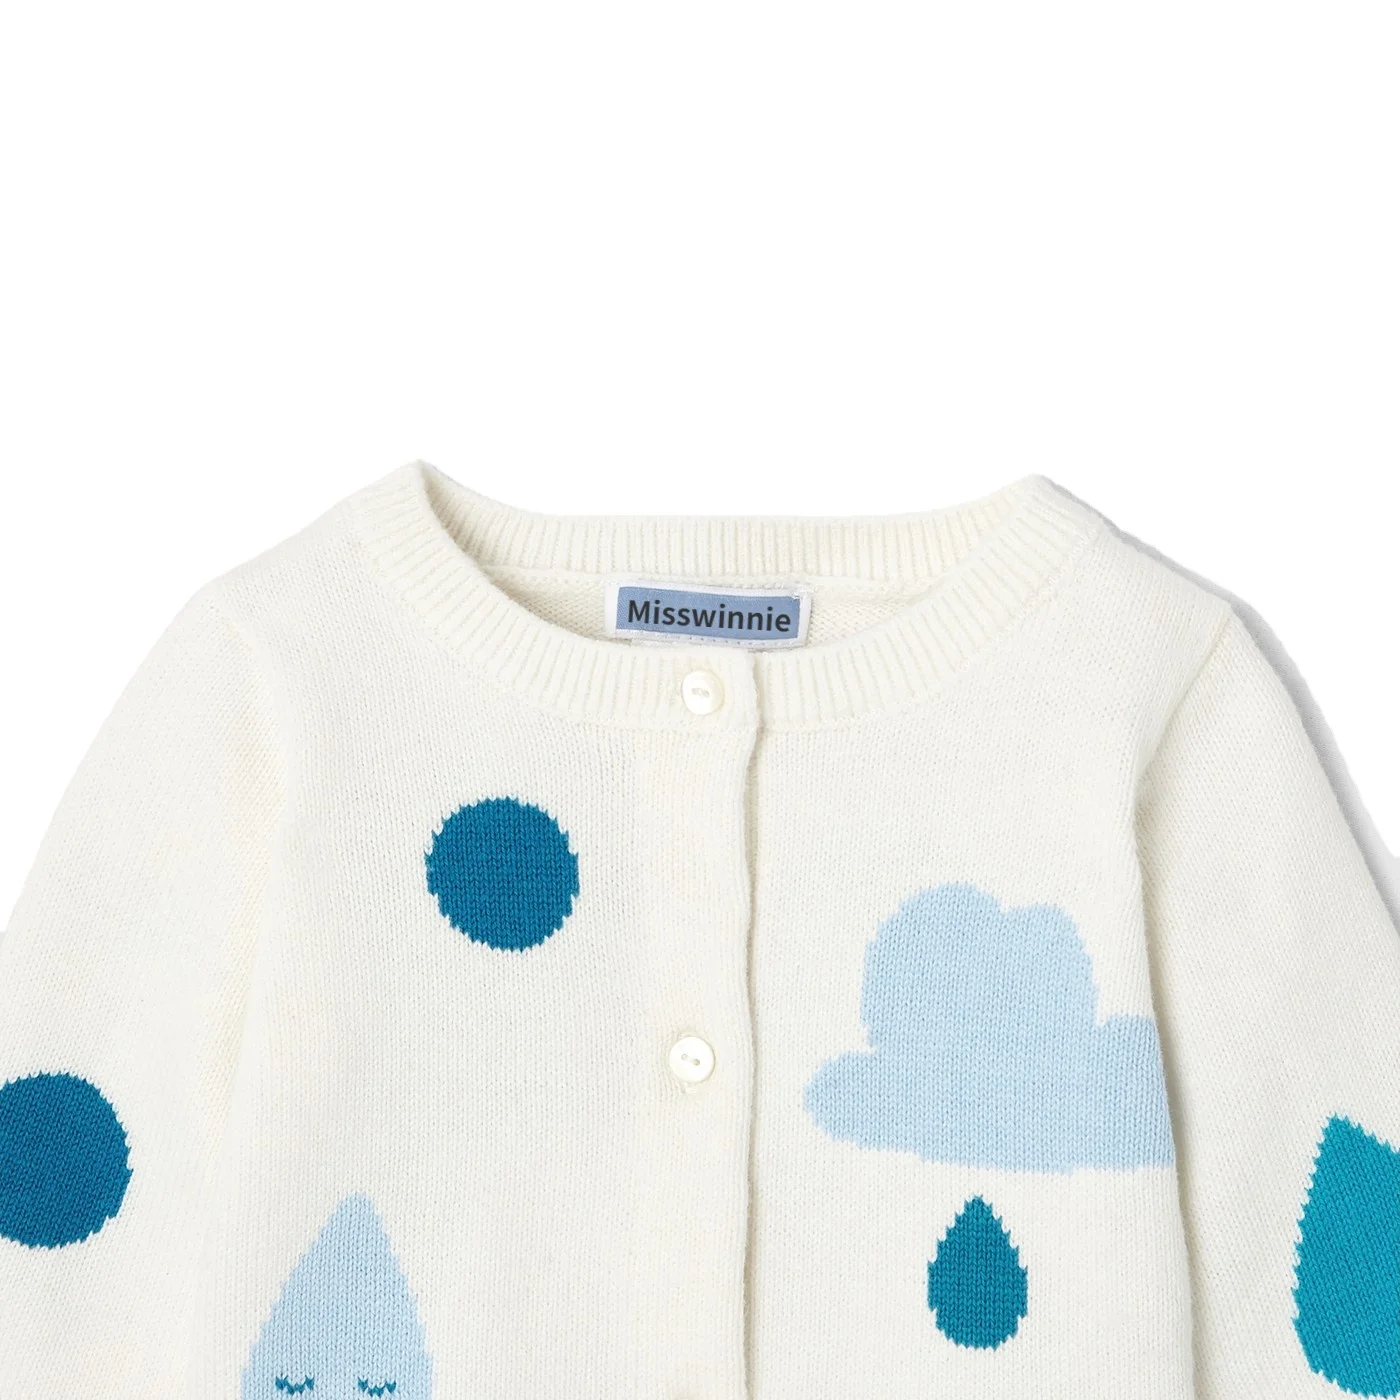 Guangzhou OEM & ODM cotton knit baby girls sweater autumn winter sweater with shell button on front kids cardigan